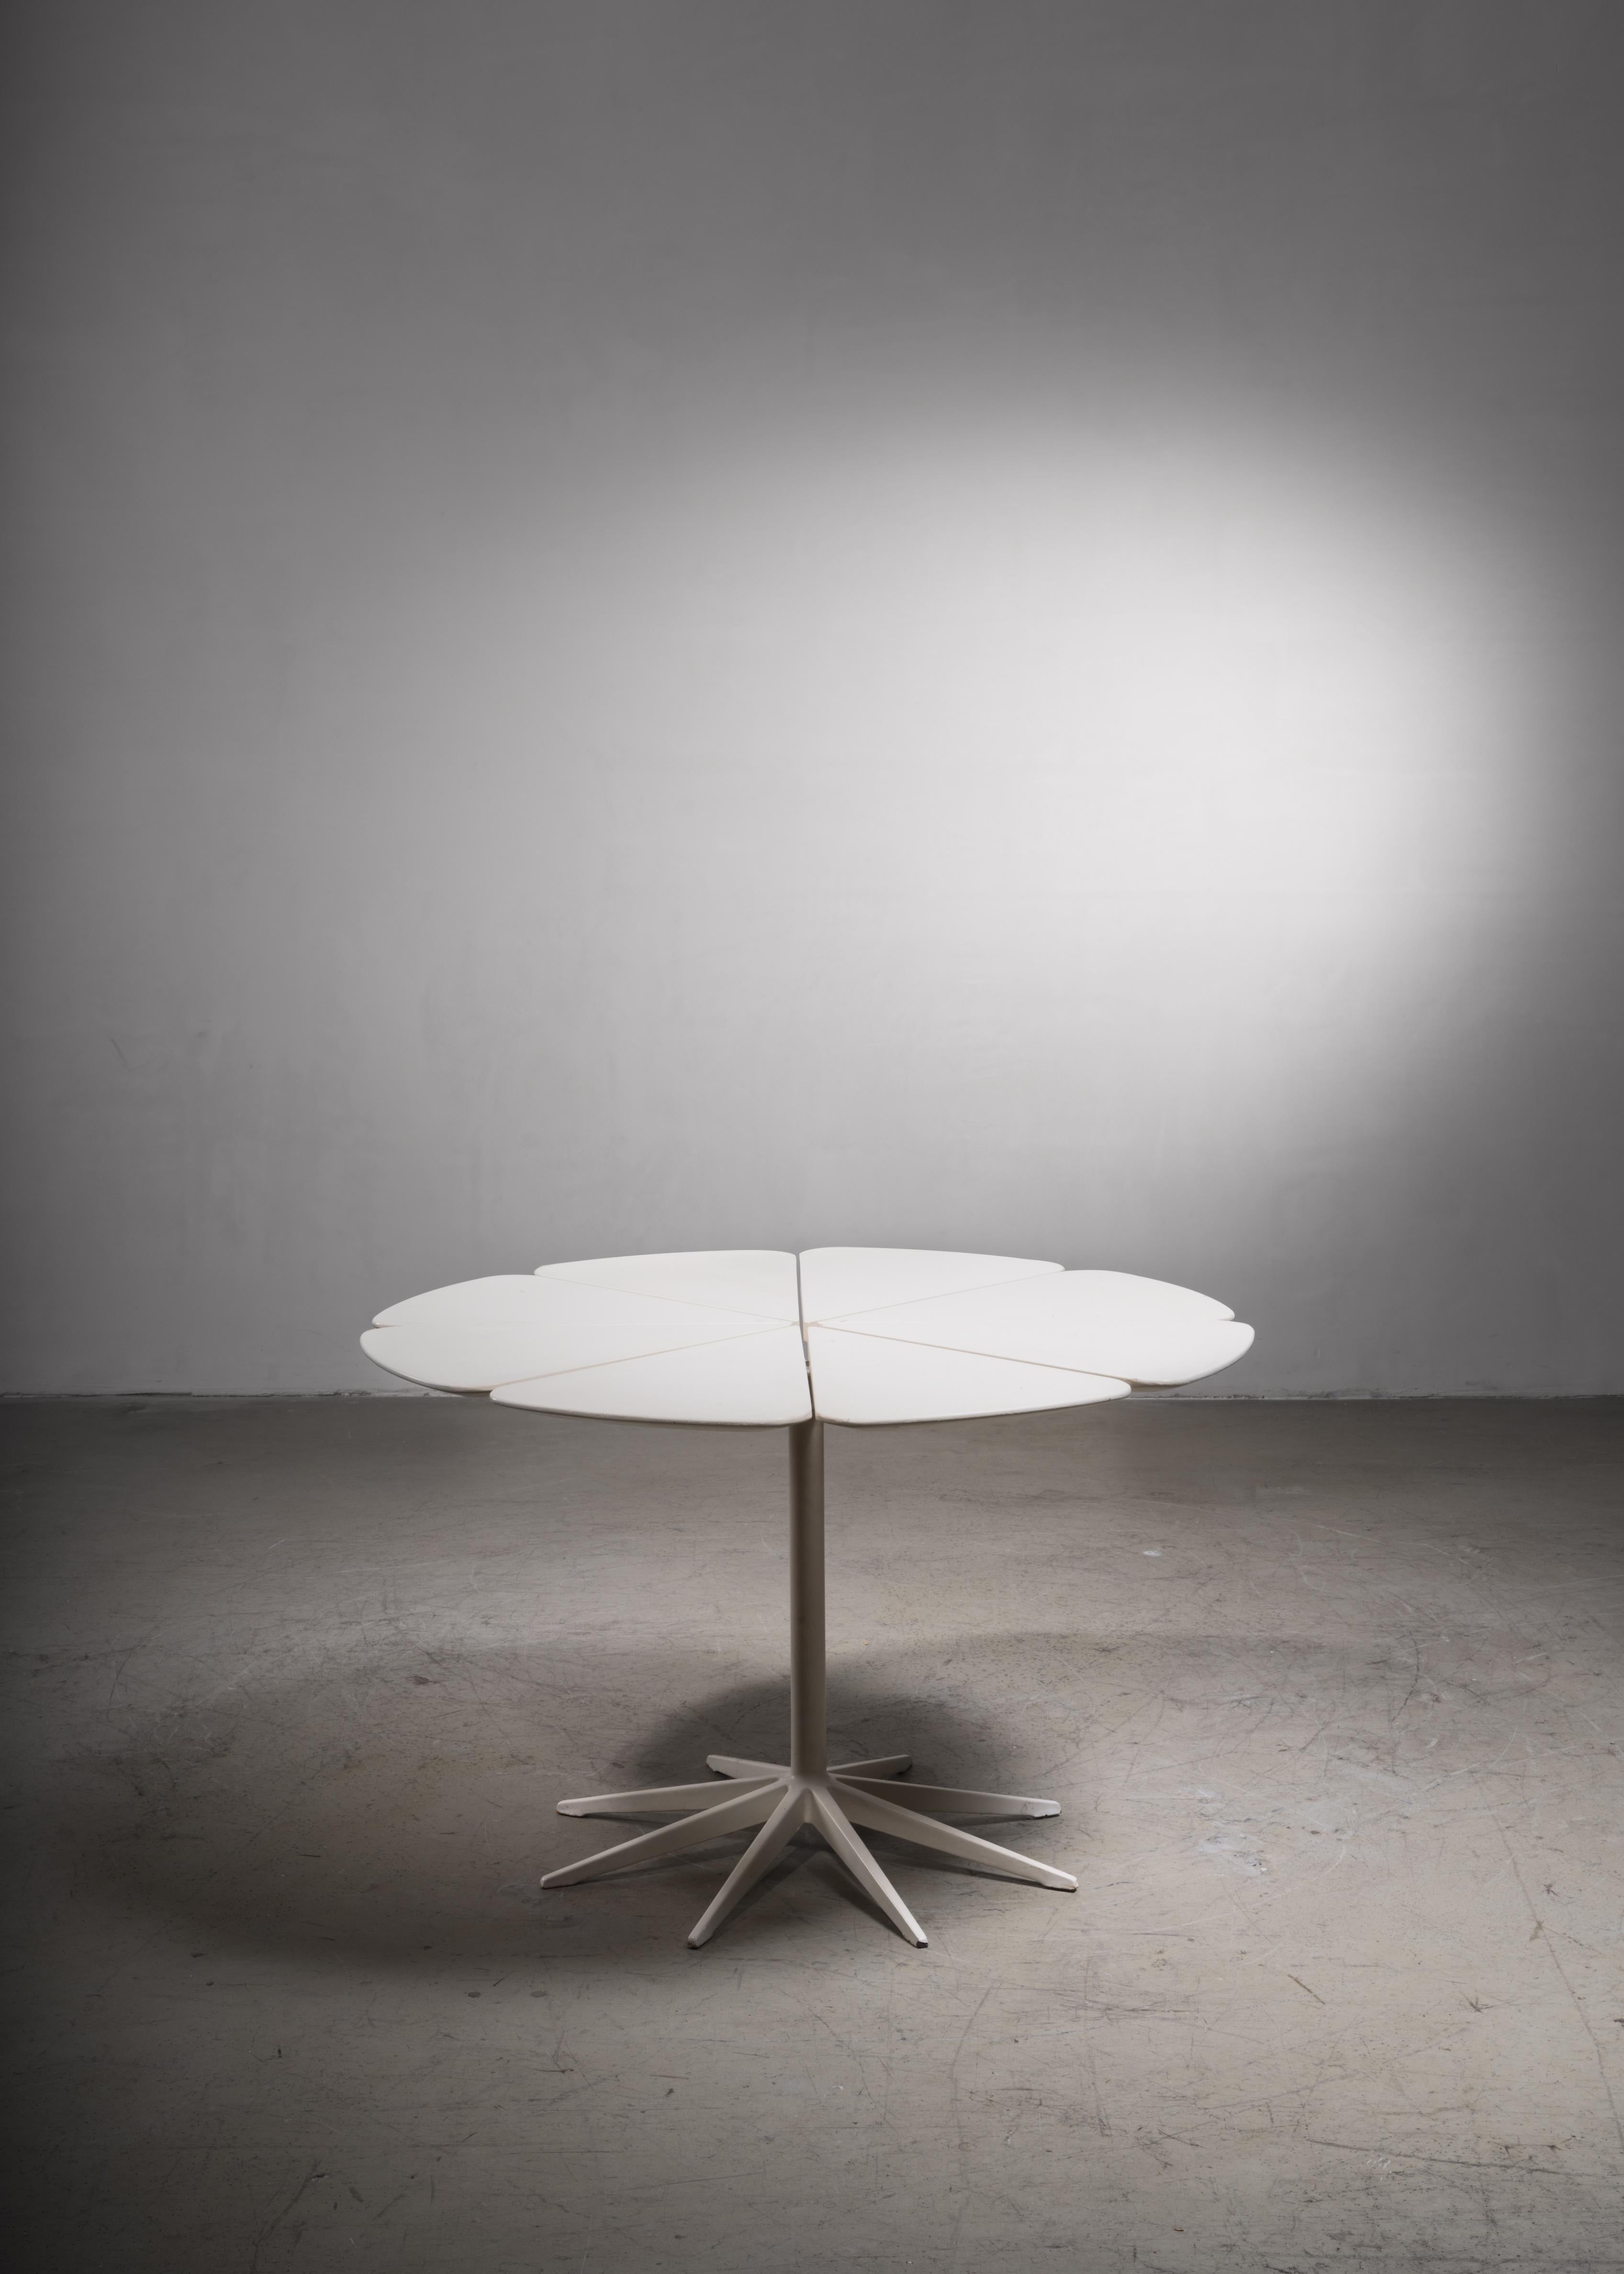 A white petal dining table by Richard Schultz for Knoll. The table is made of eight wooden petal-like pieces, mounted on an aluminum 'spider.' The petal dining table was a collaboration of Richard Schultz with Knoll International. He designed this